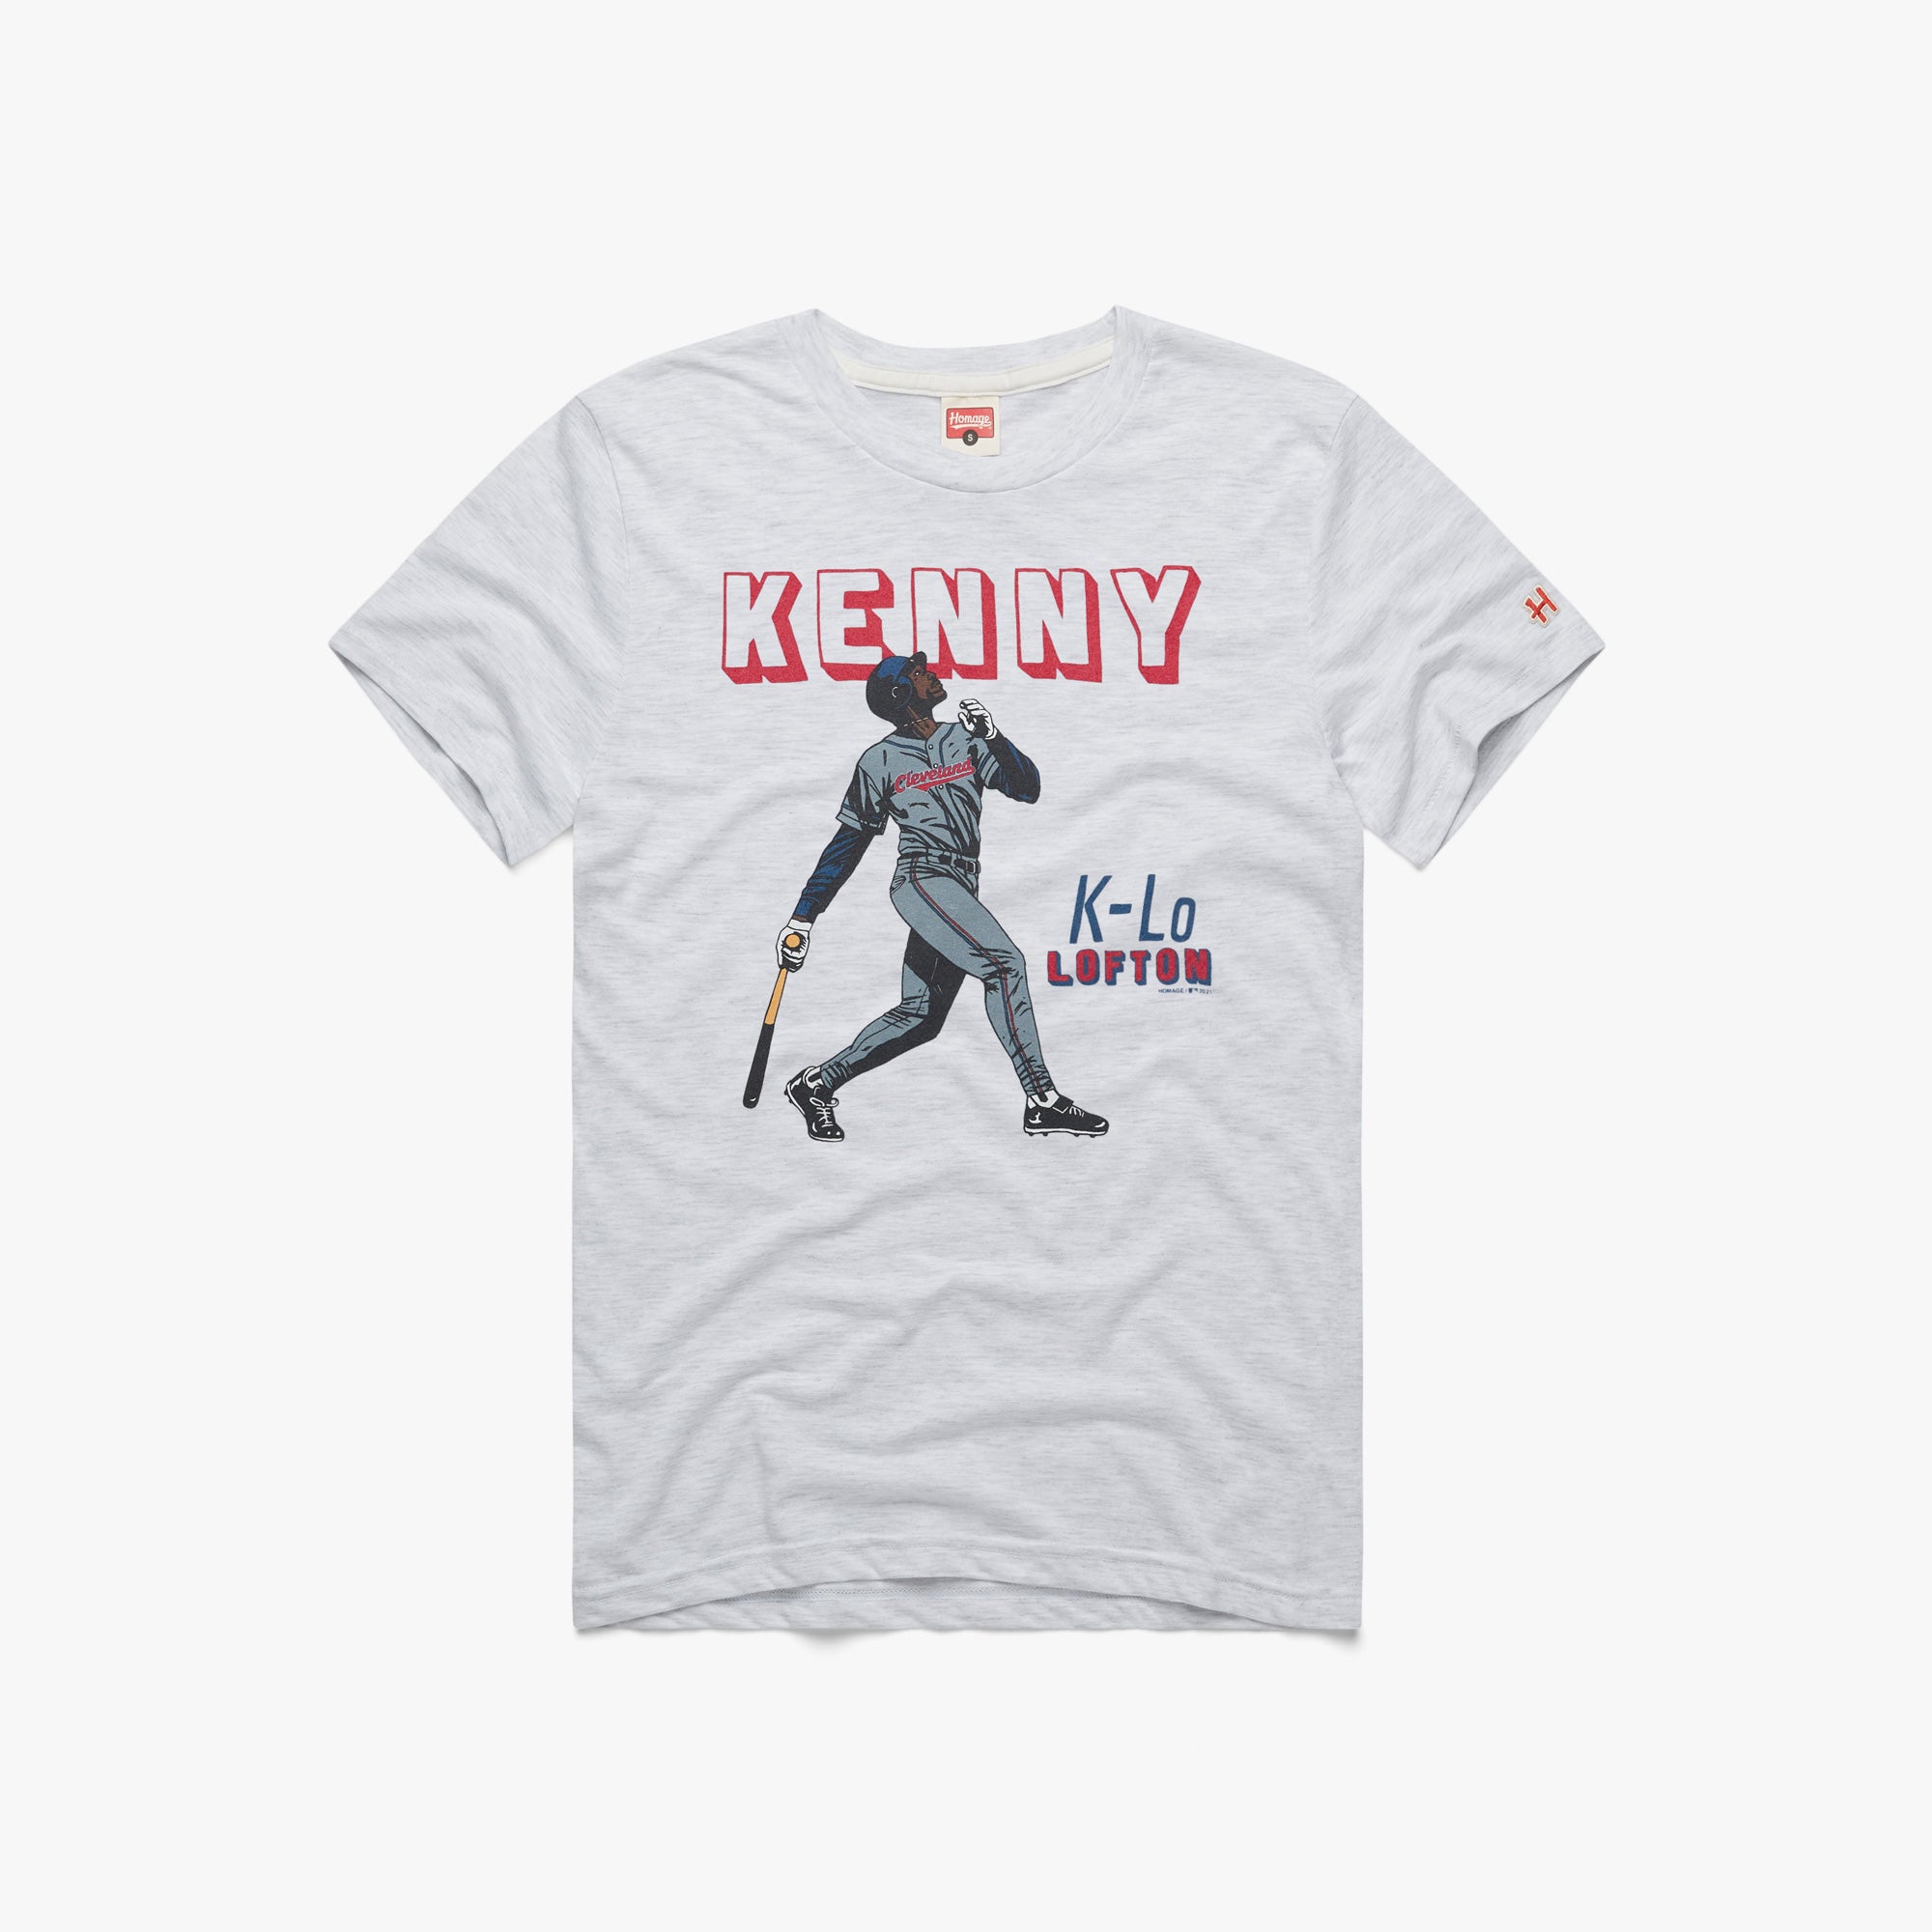 Kenny Lofton Cleveland Home Run T-Shirt from Homage. | Ash | Vintage Apparel from Homage.